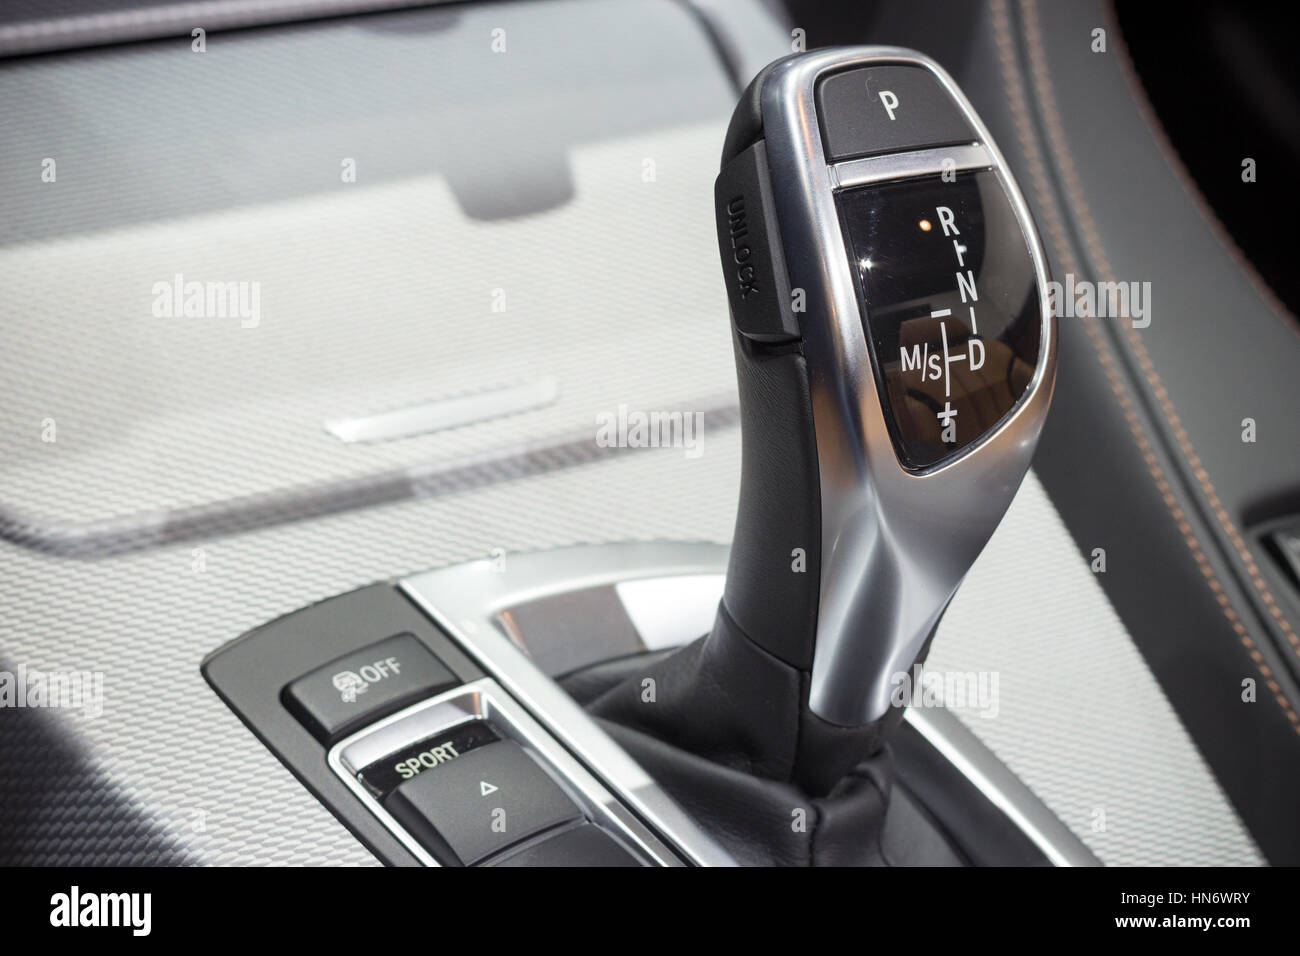 BRUSSELS - JAN 12, 2016: Transmission stick in a BMW 6-series car at the Brussels Motor Show. Stock Photo